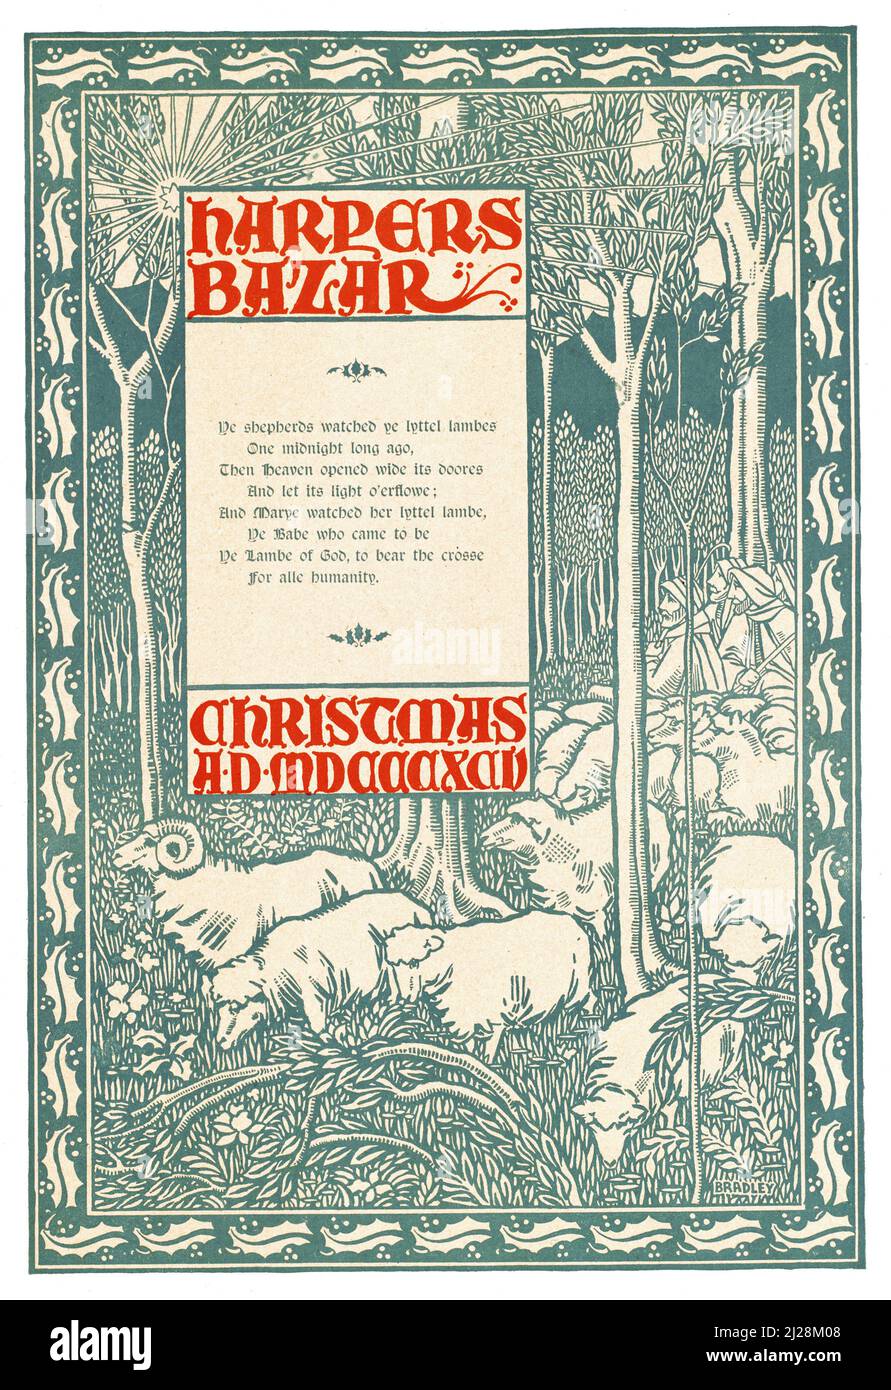 Will Bradley artwork - Harpers Bazar, Christmas A.D. MDCCCXCV (1895) American Art Nouveau - Old and vintage poster. Stock Photo